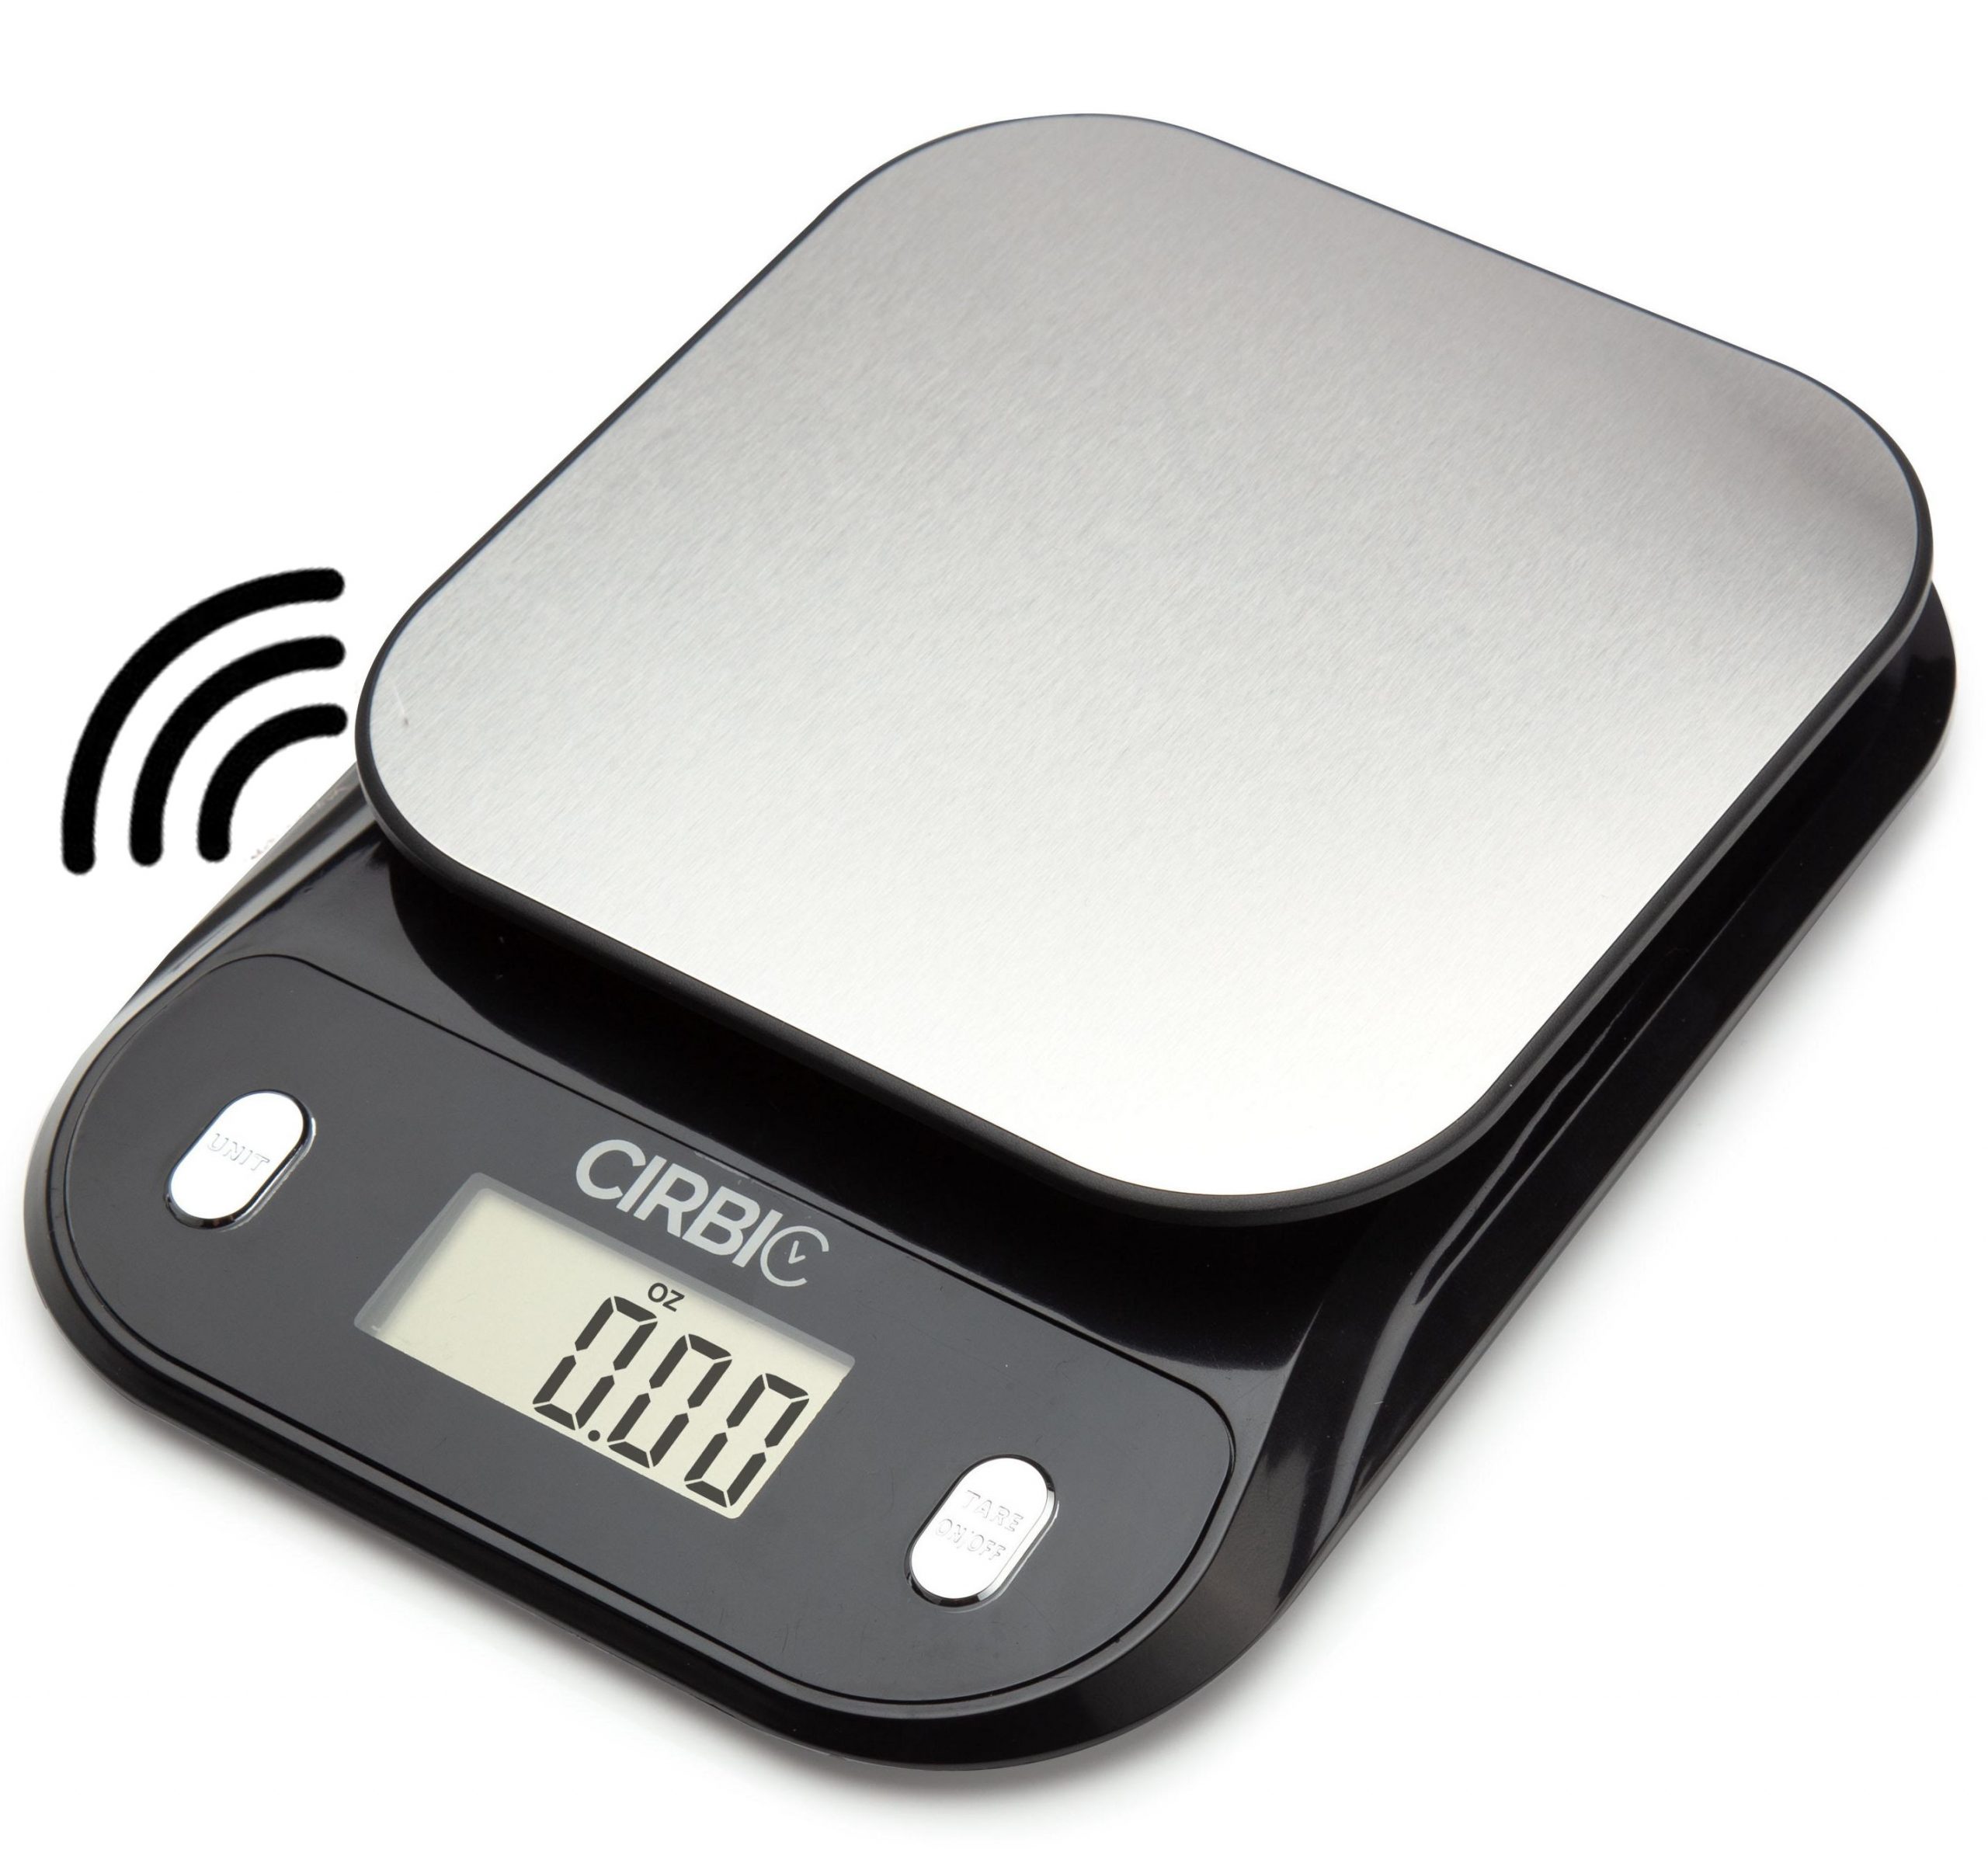 Talking Kitchen Scales – Big Numbers with Clear Loud Voice North American  Accent – Cirbic – products for visually impaired